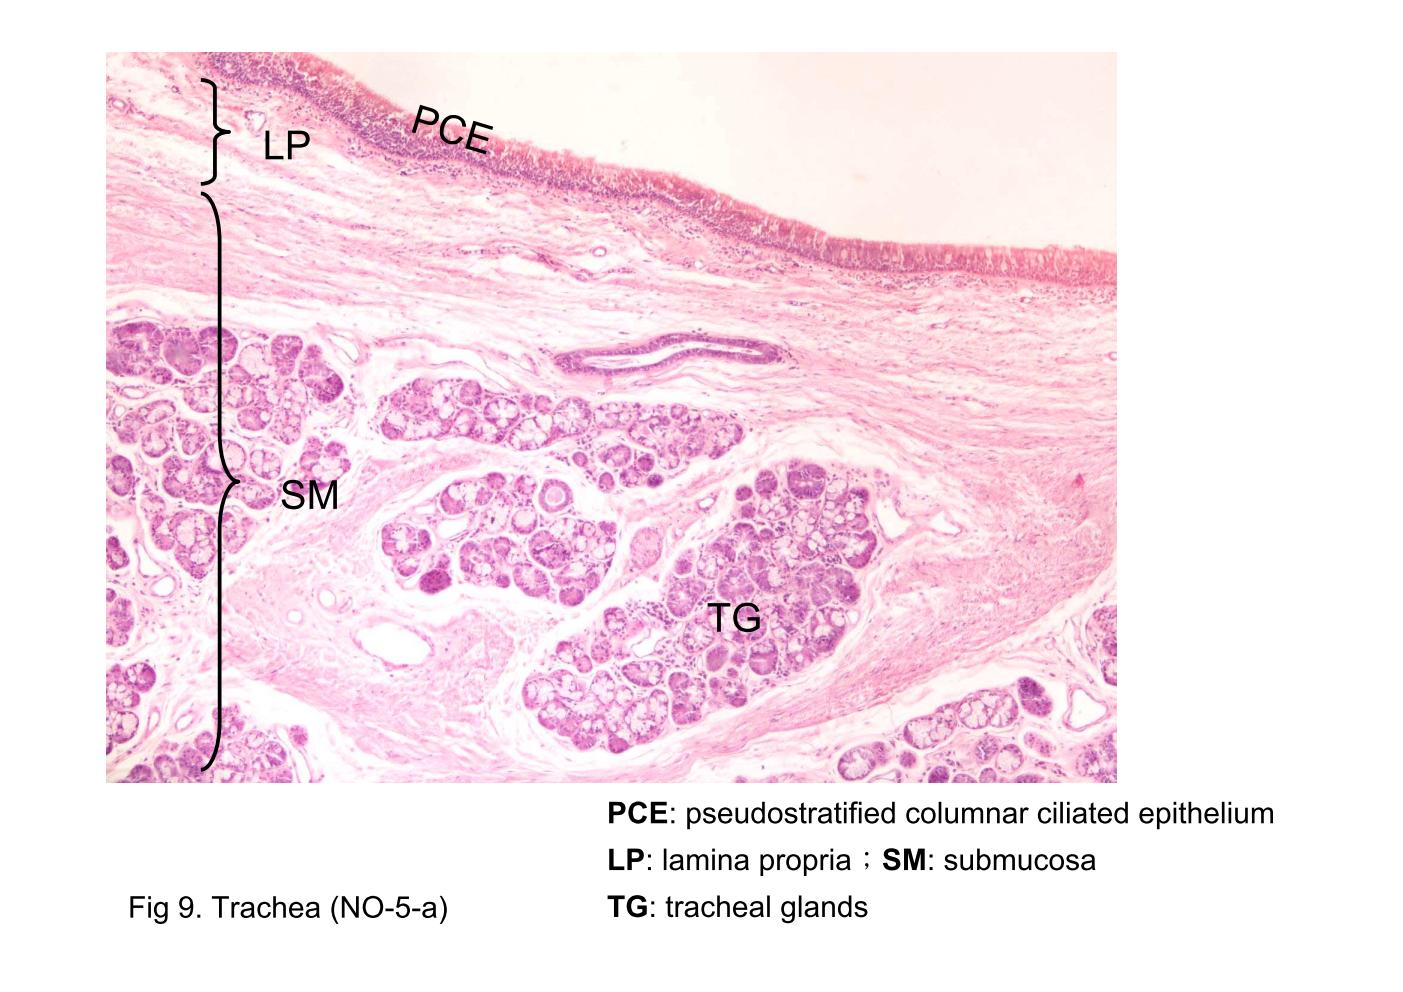 block9_20.jpg - Fig 8 & 9. Trachea (NO-5-a)The wall of the trachea shows the pseudostratified columnar ciliated epithelium (PCE) located on a well-developed basement membrane (BM). A thin lamina propria (LP) and a dense thick submucosa (SM) underlie the respiratory epithelium. Numerous goblet cells (GC) are evident as clear ovoid spaces in the respiratory epithelium. Seromucous glands (tracheal glands) (TG) are seen in the submucosa.